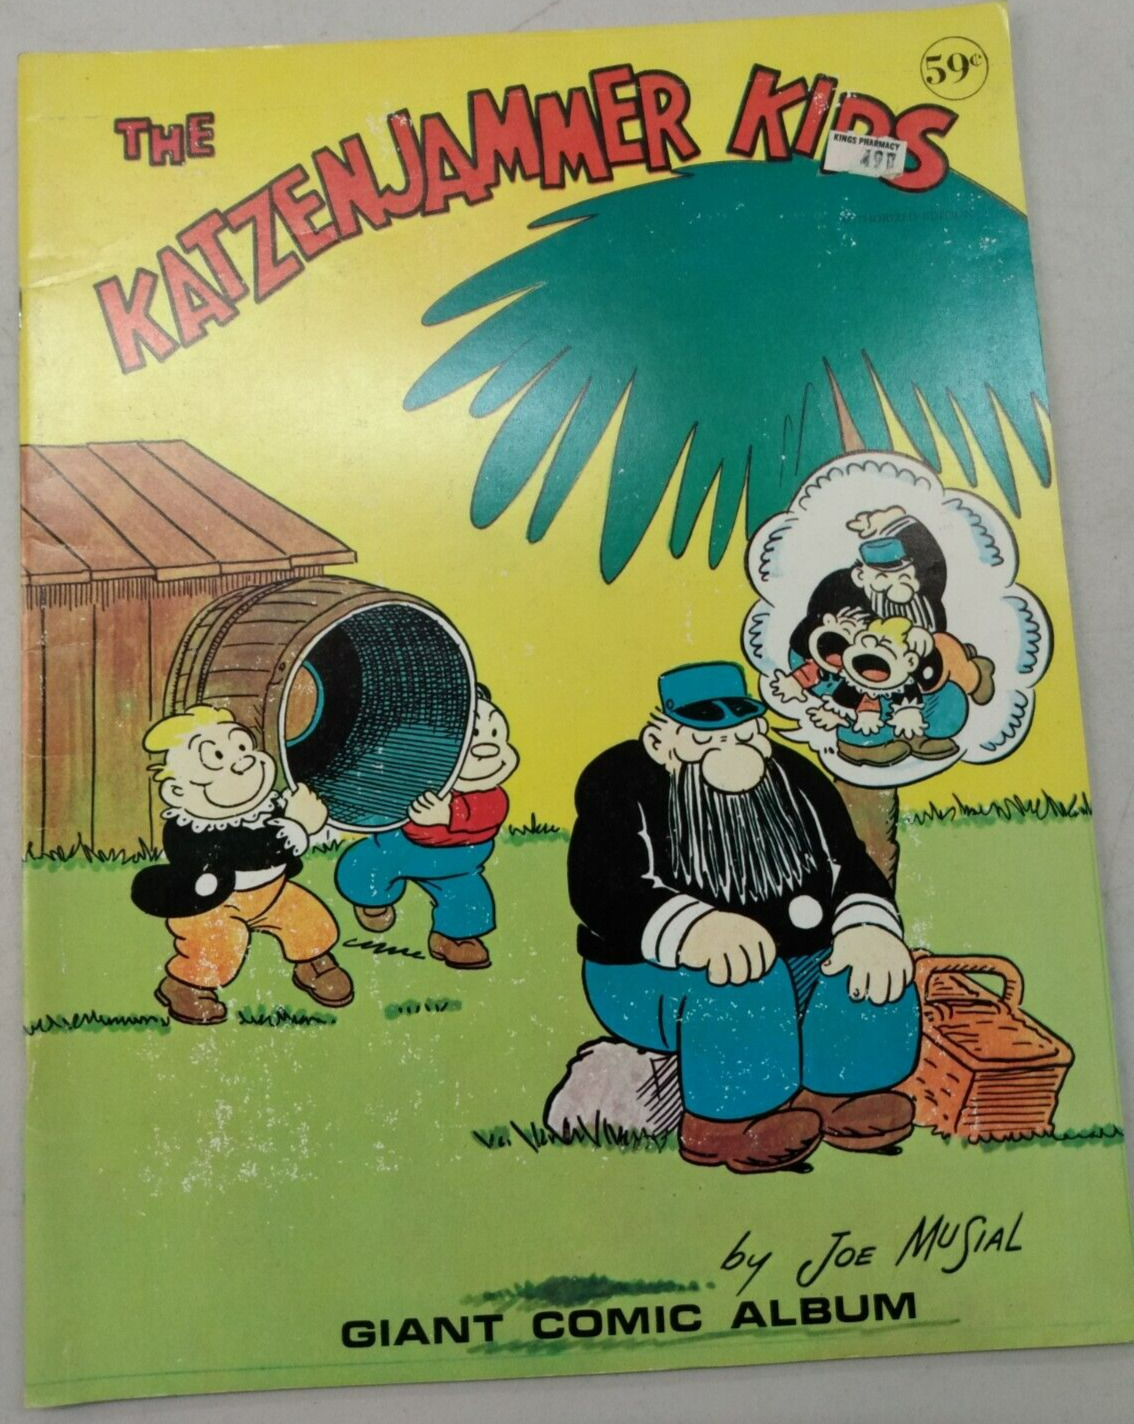 The KatzenJammer Kids by Joe Musial Large 1952 King Features Giant Comic Album